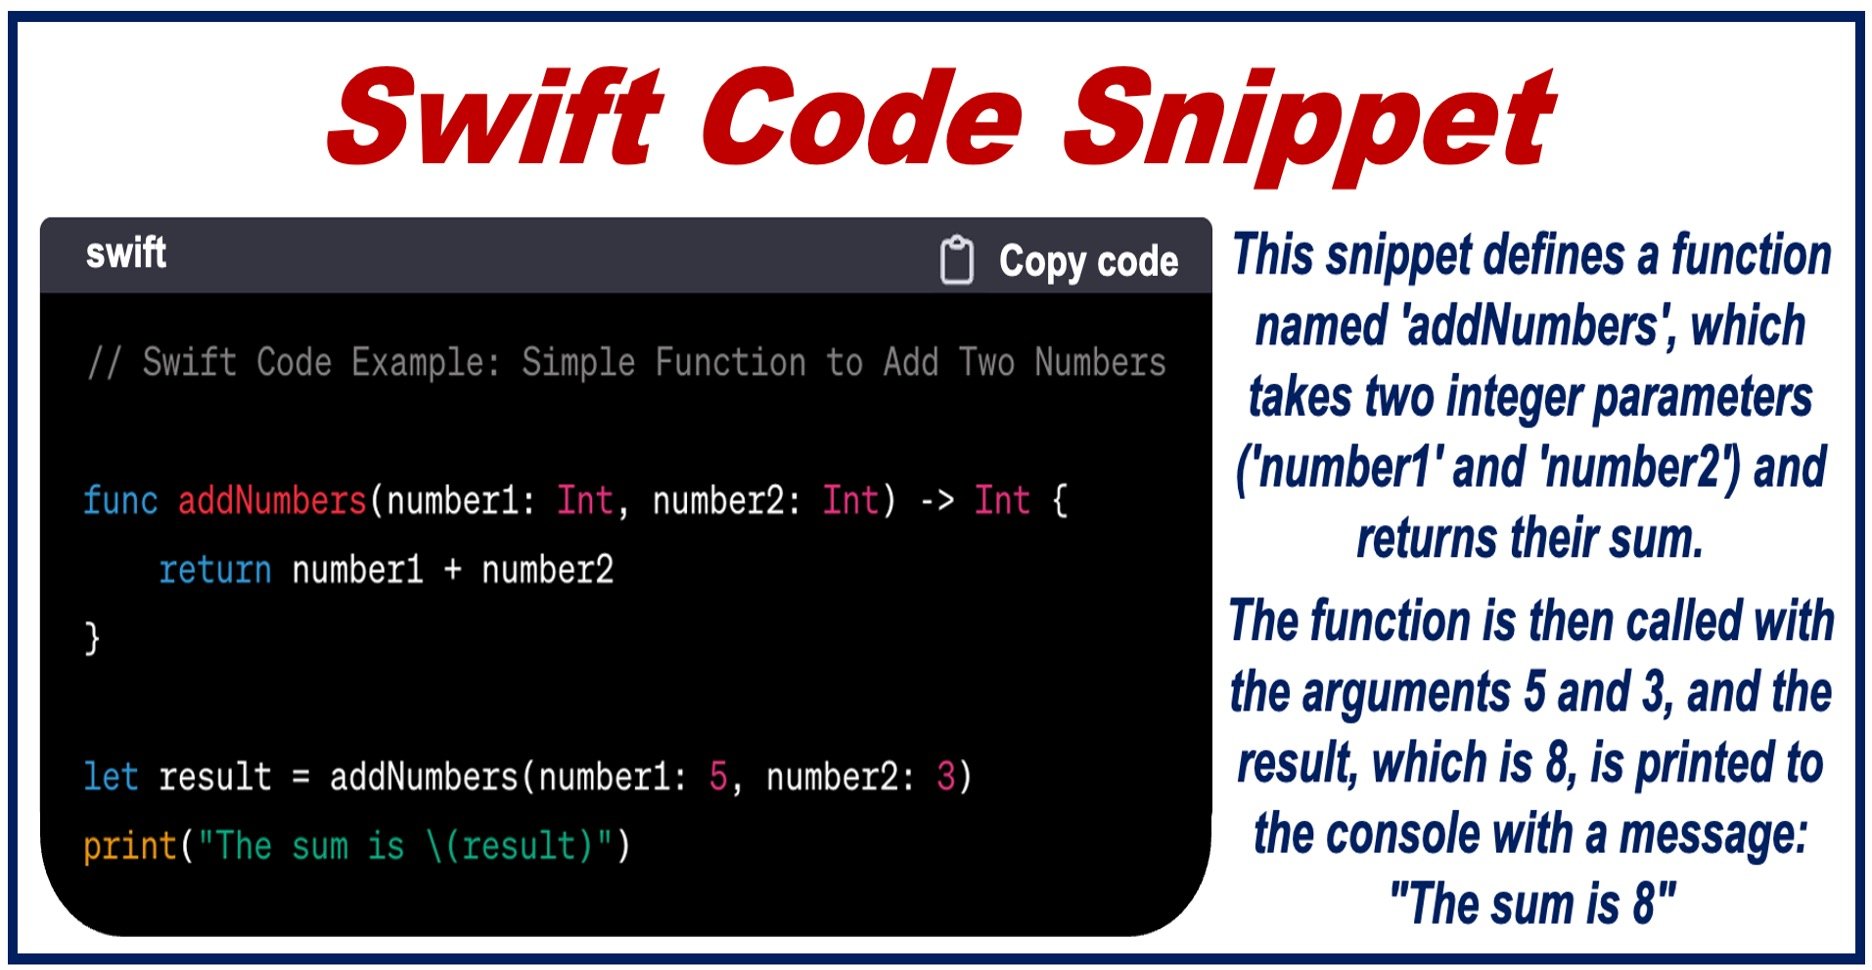 Swift Code Snippet and explanation